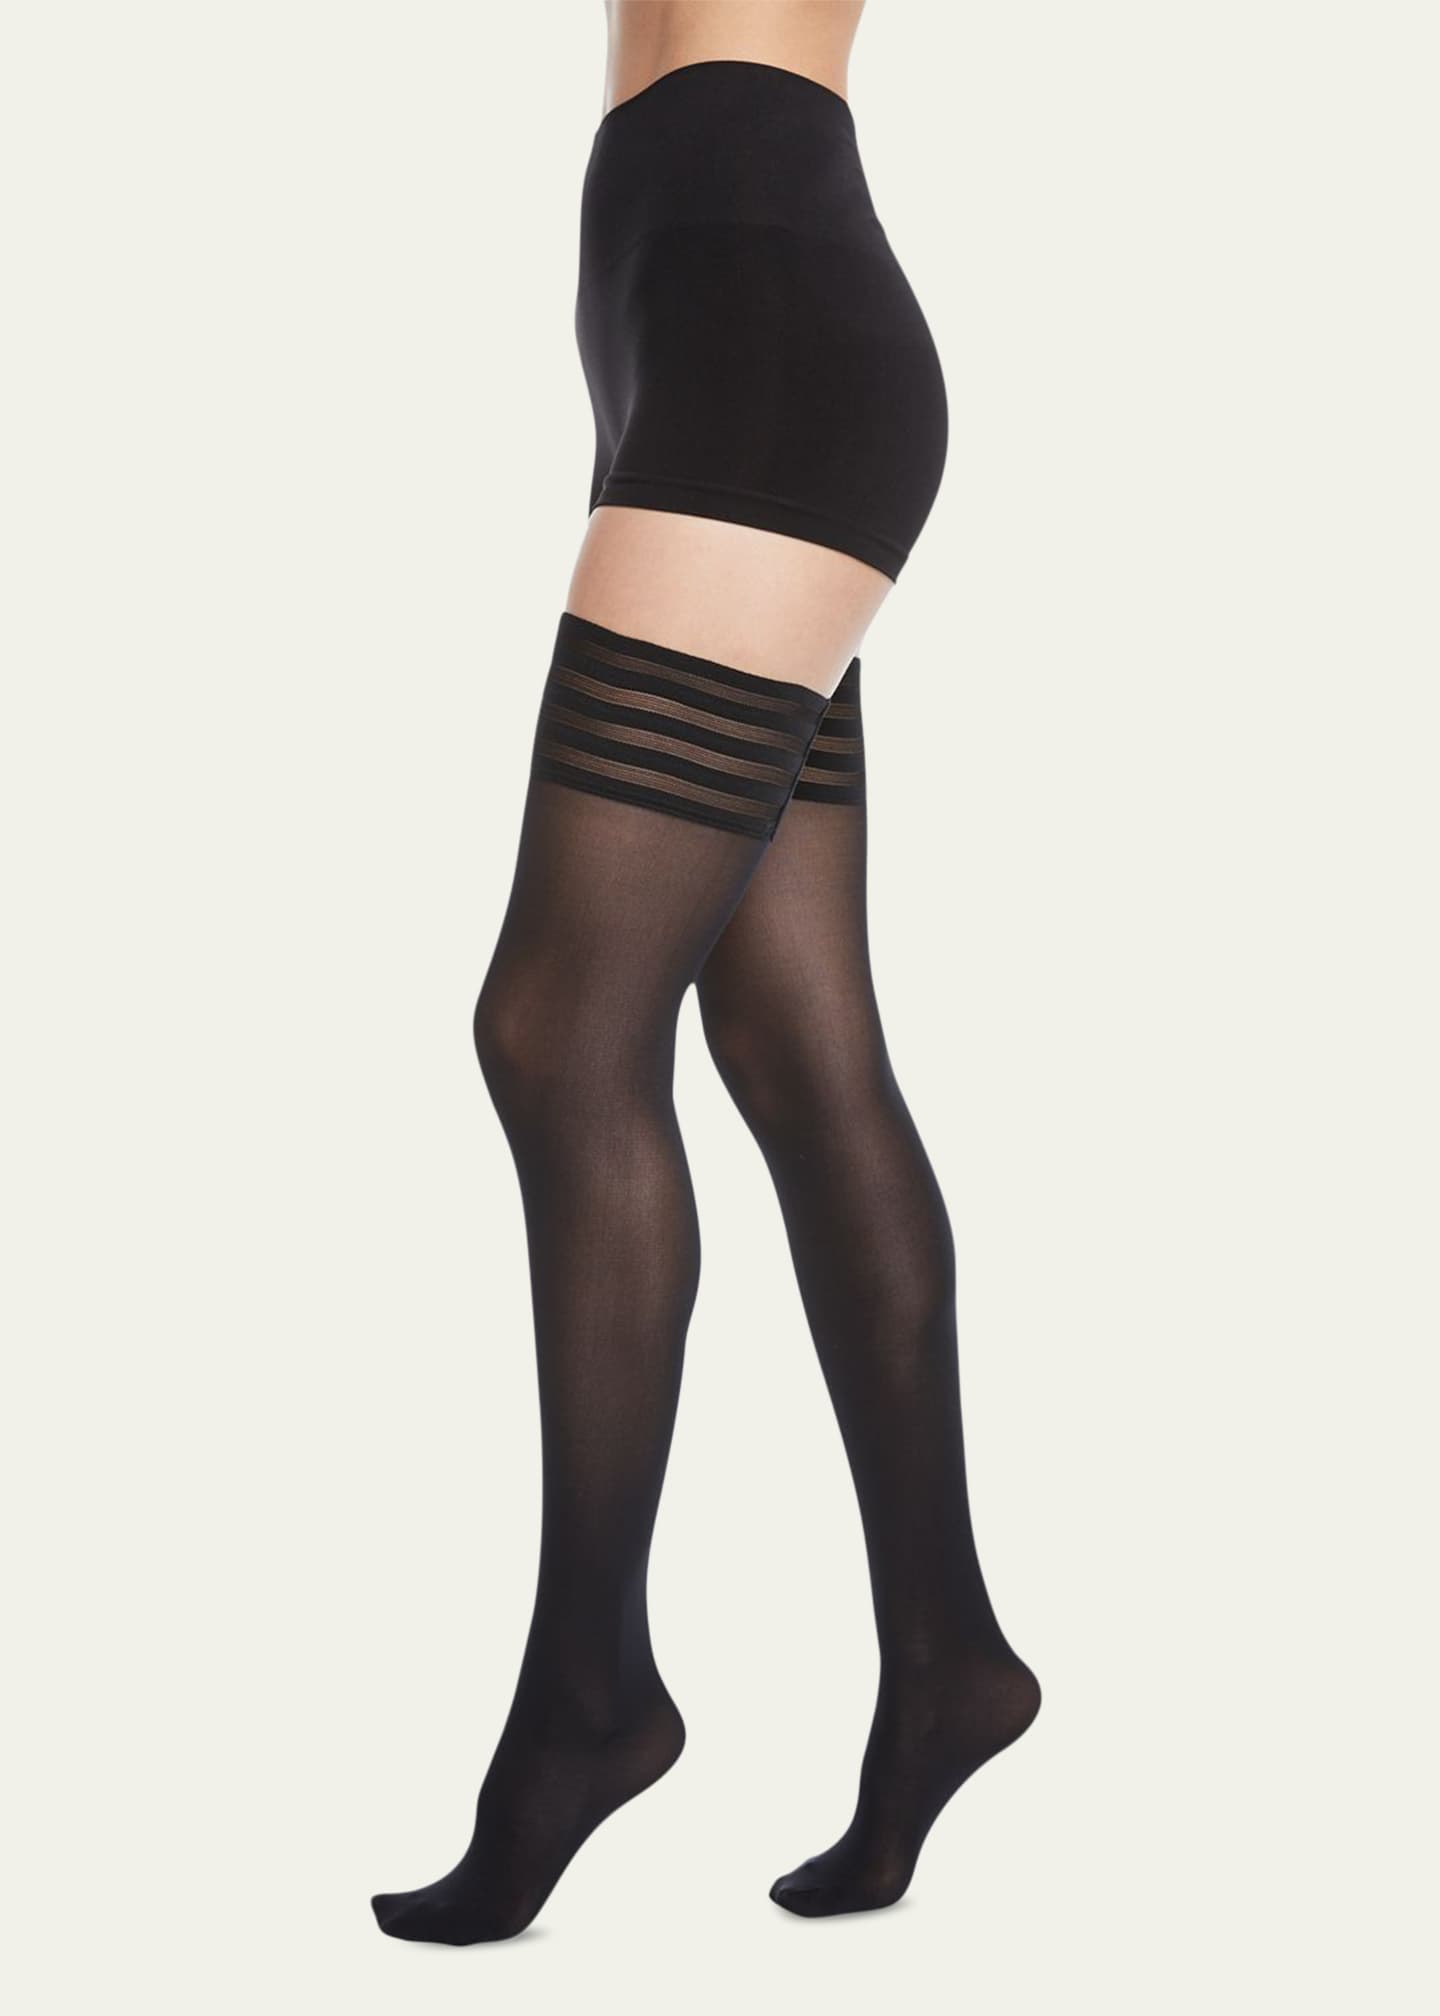 Wolford Velvet De Luxe Stay-Up Thigh Highs Stockings Image 1 of 2